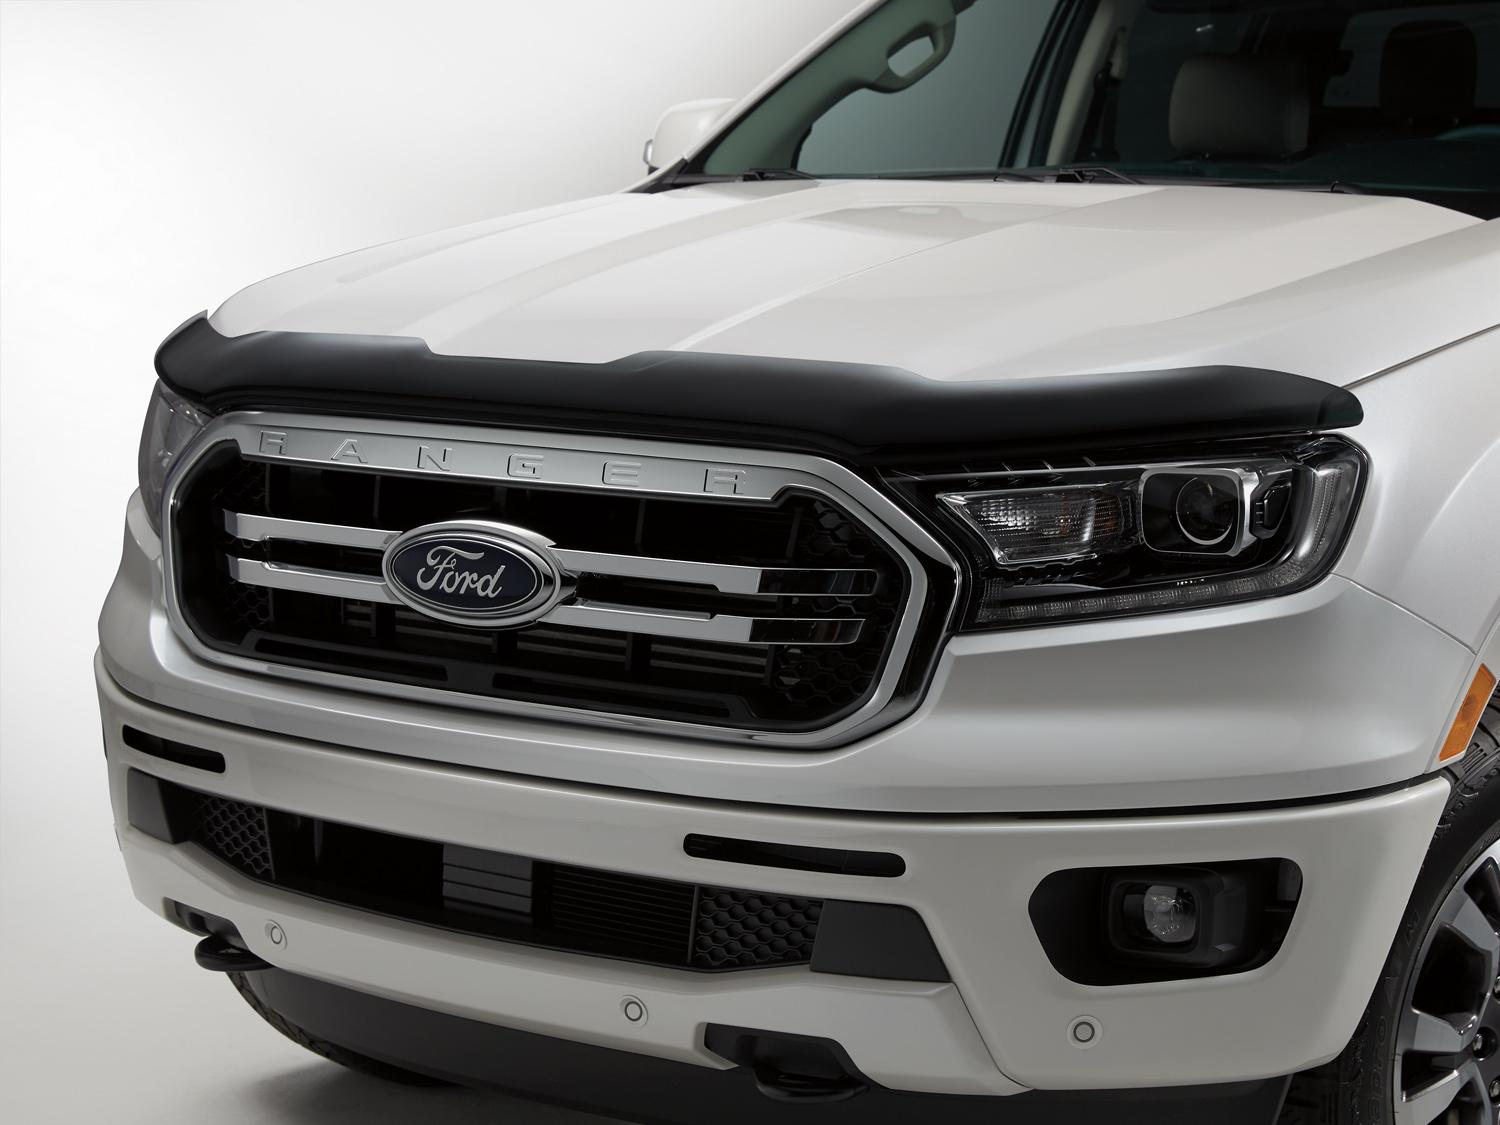 2023 Ford Ranger Accessories & Parts at